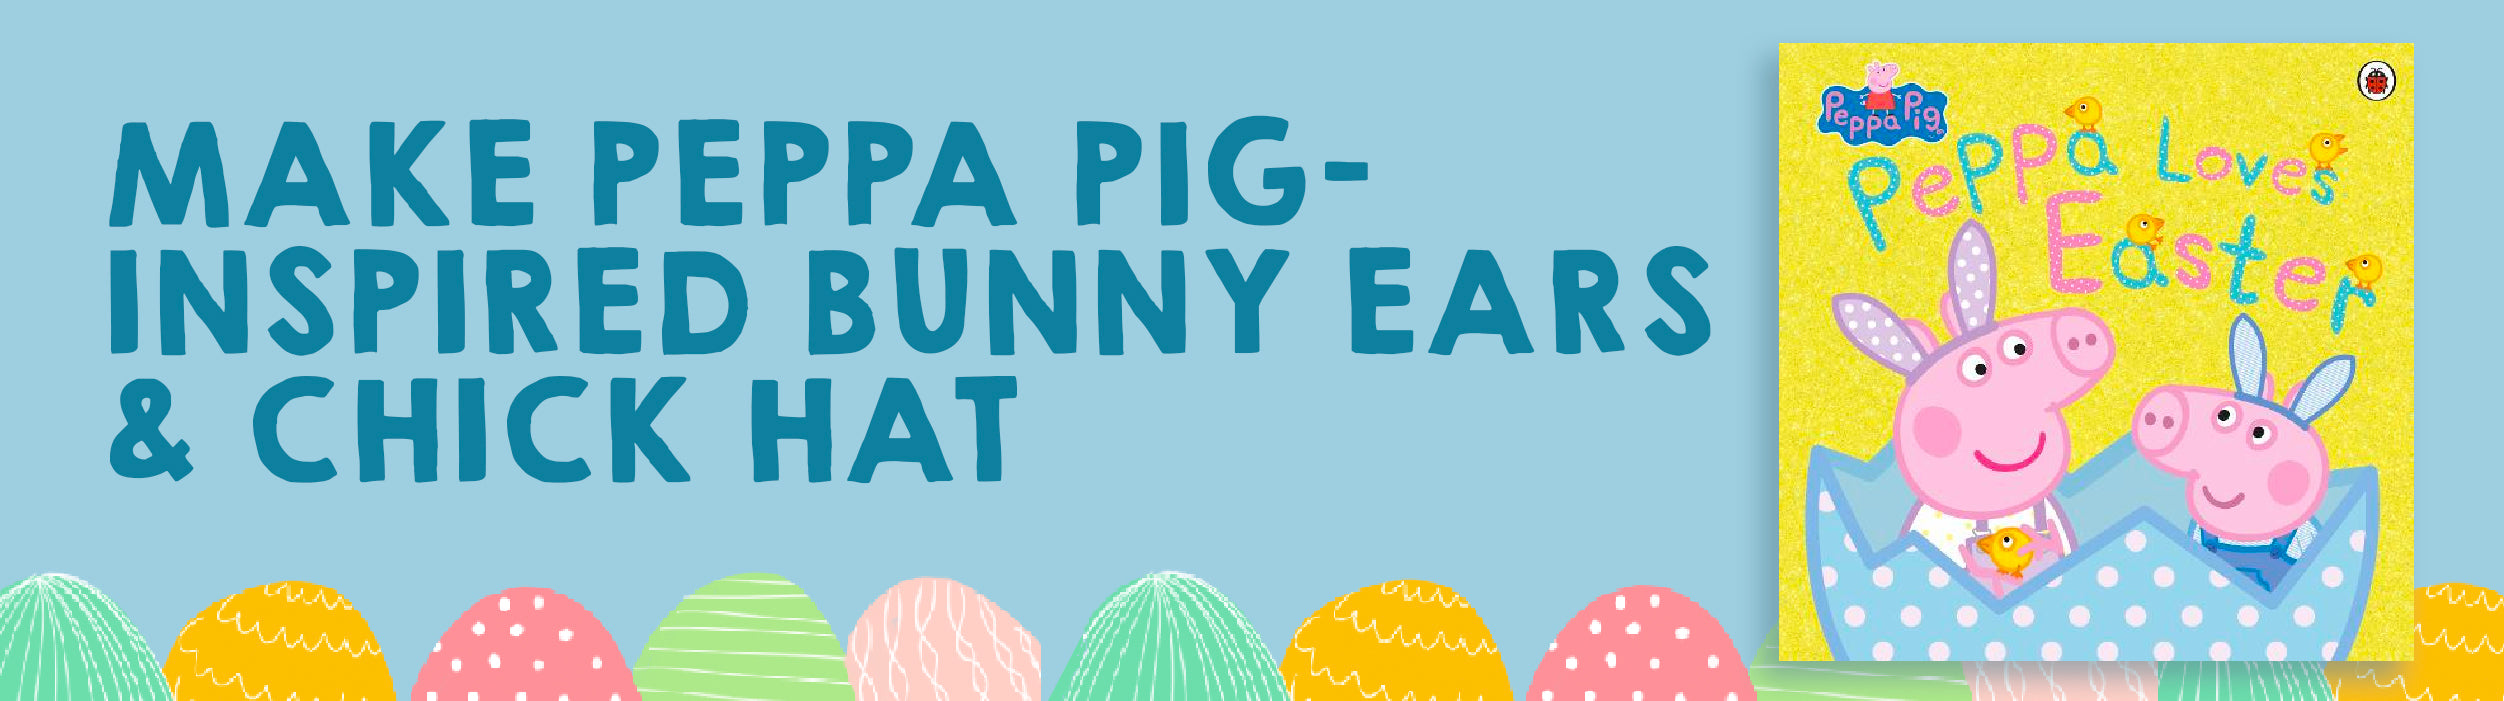 Make Peppa Pig-inspired Bunny Ears & Chick Hat